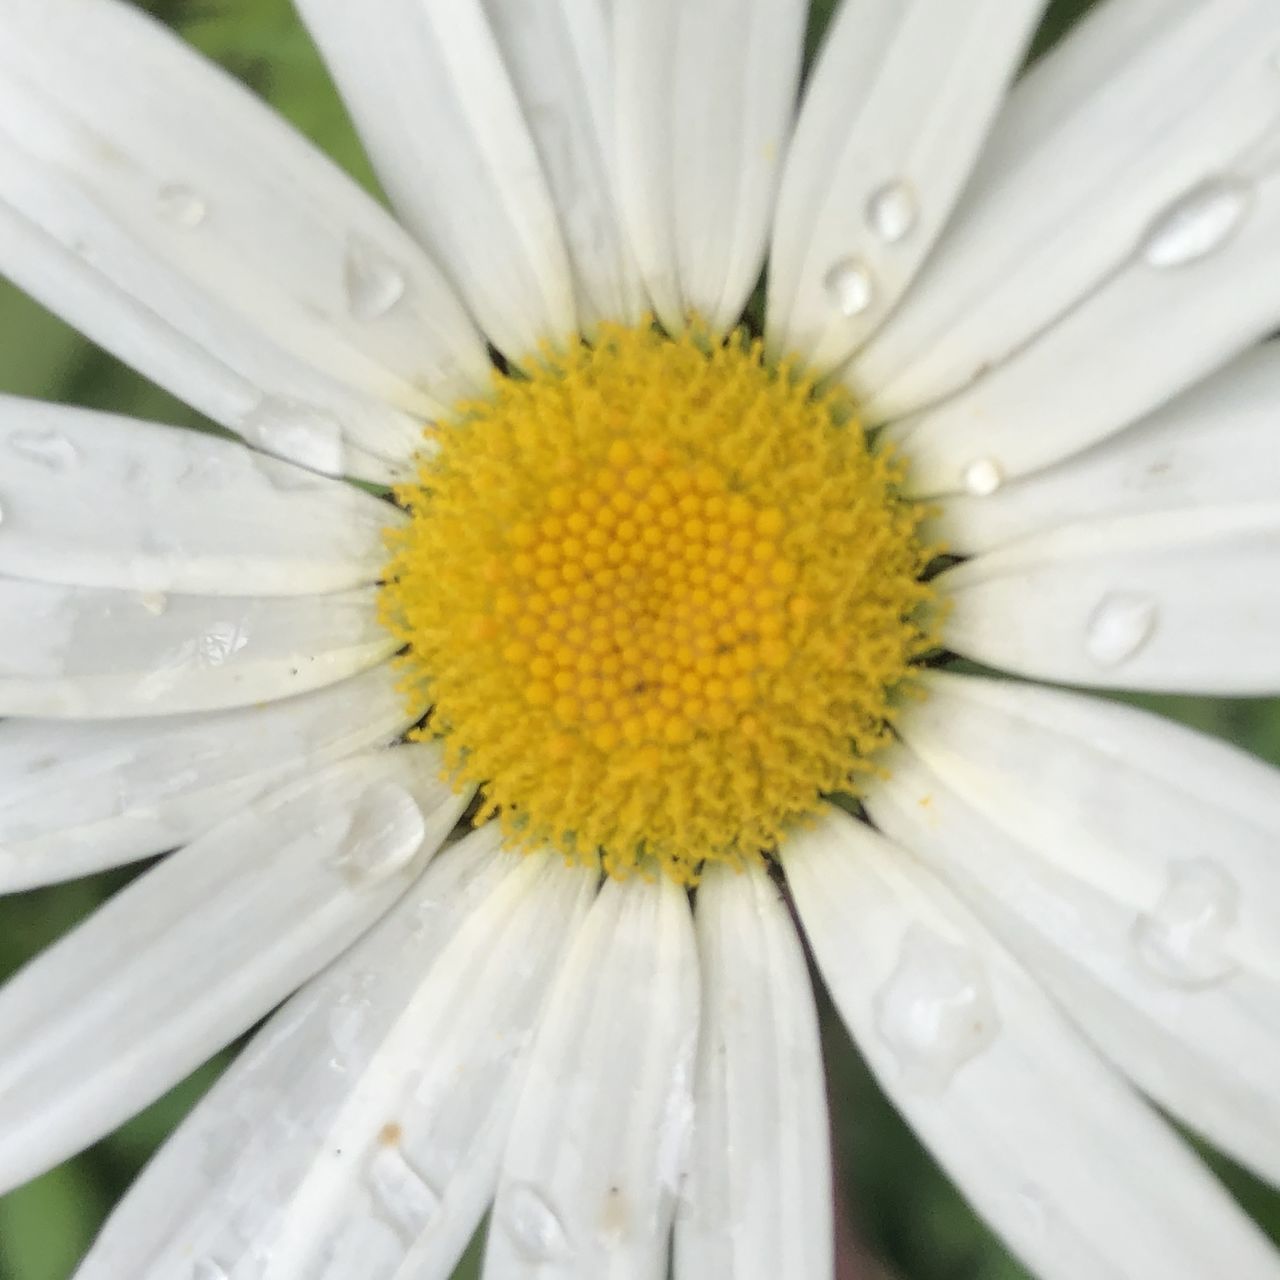 CLOSE-UP OF WHITE DAISY FLOWER WITH POLLEN